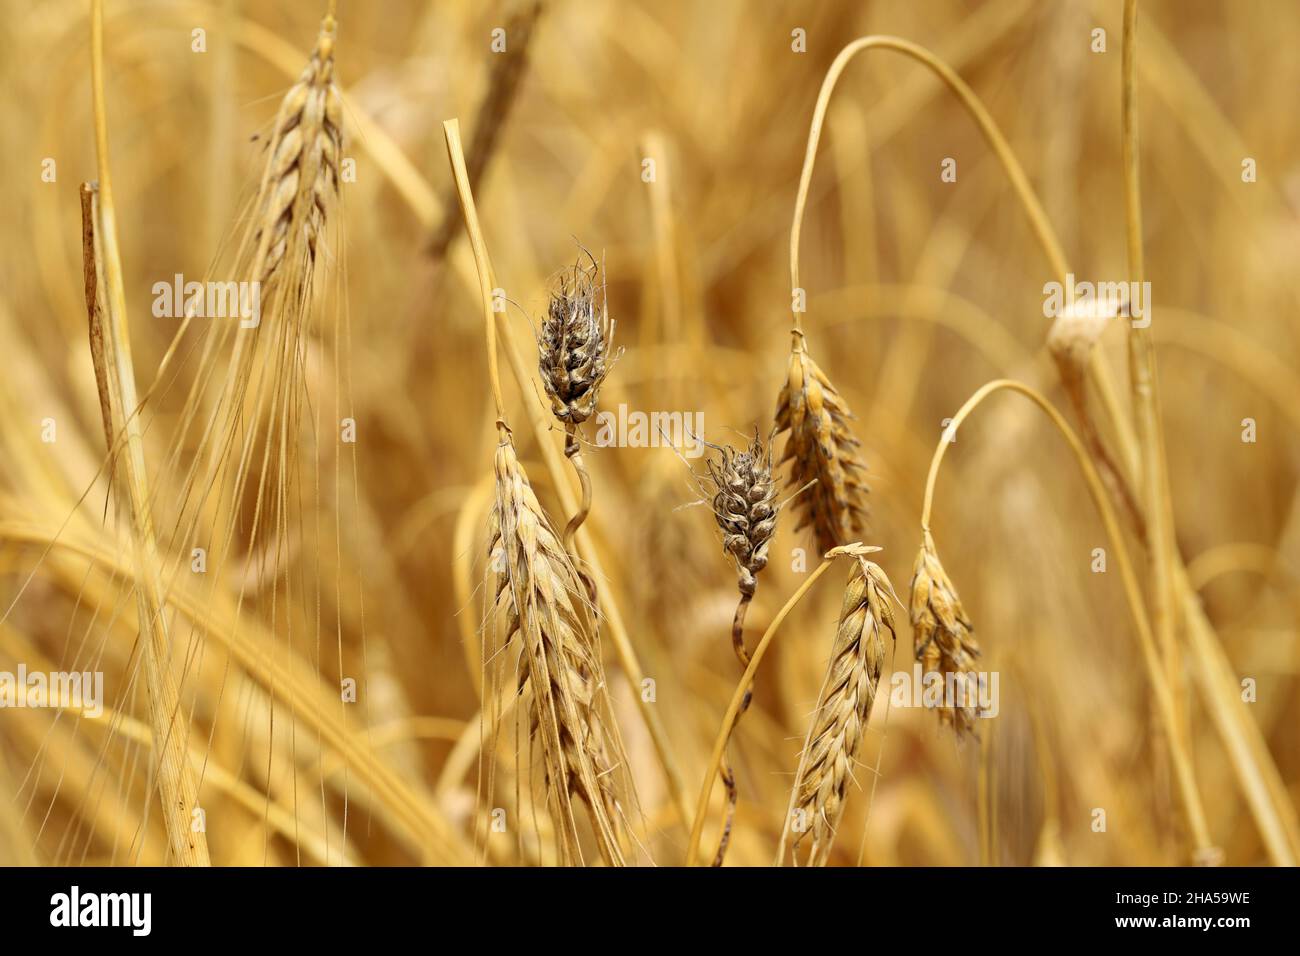 Covered smut of barley is caused by the fungus Ustilago hordei. Stock Photo